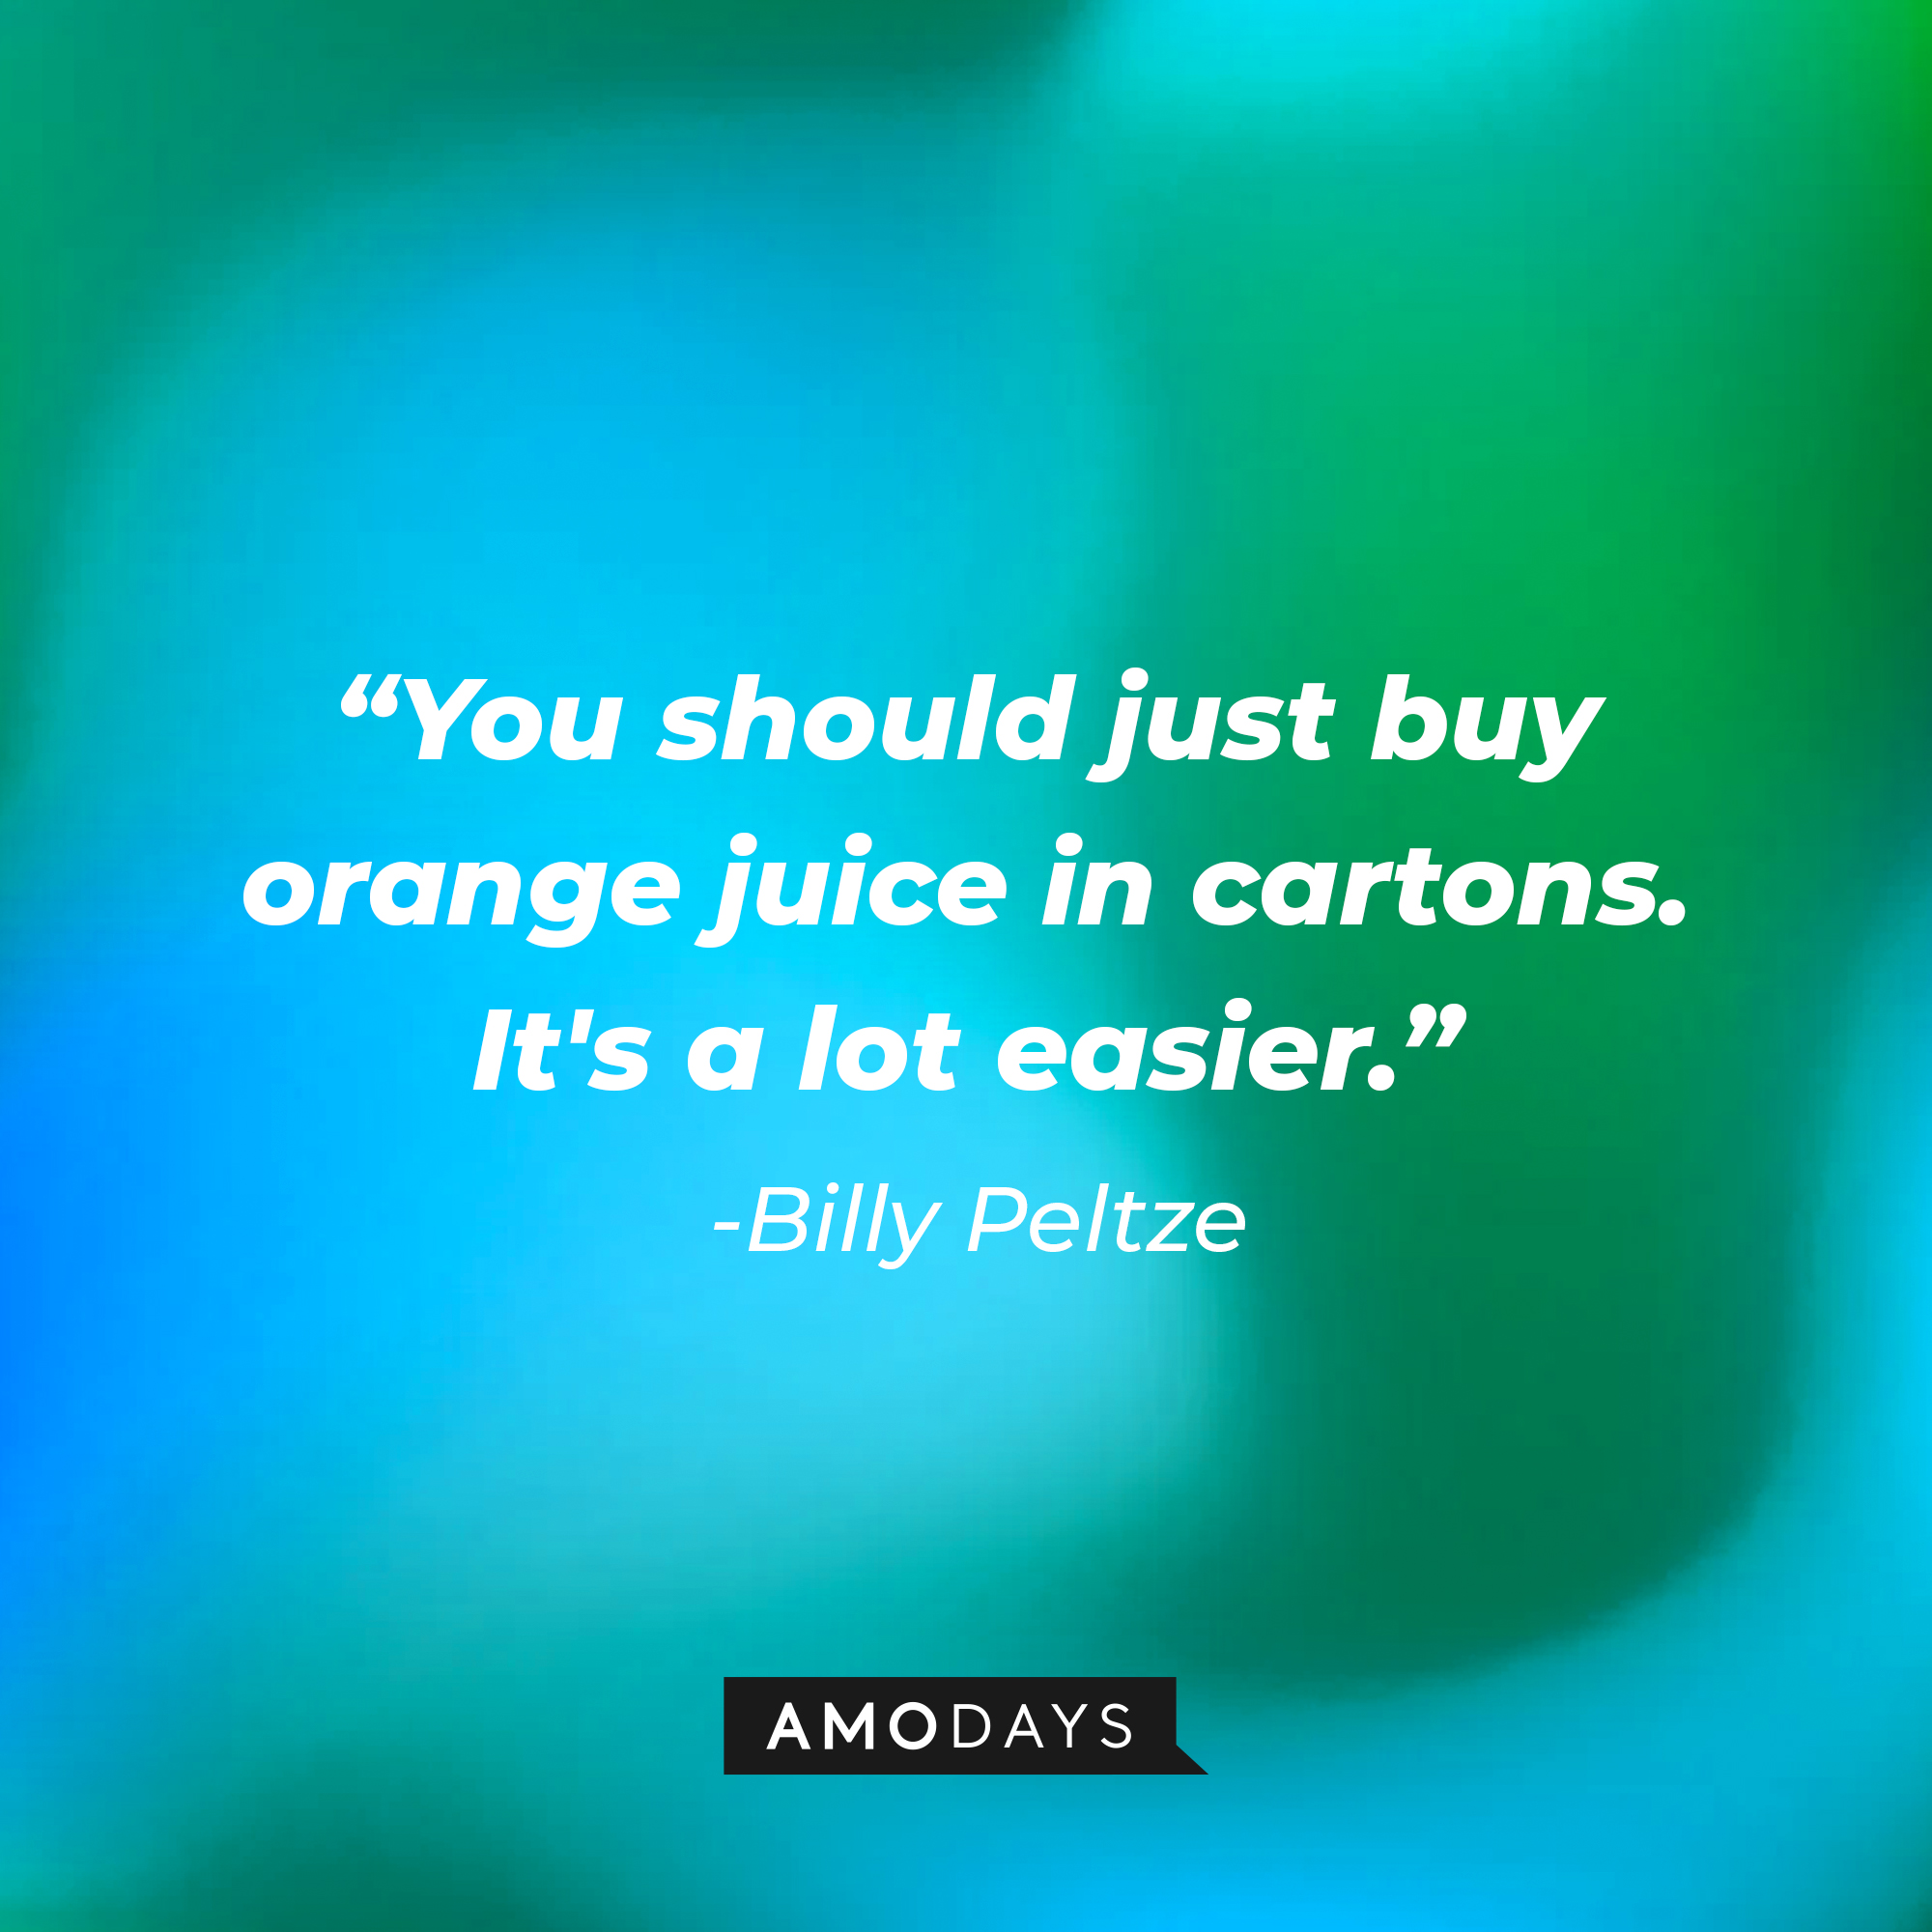 Billy Peltzer's quote: "You should just buy orange juice in cartons. It's a lot easier." | Source: AmoDays